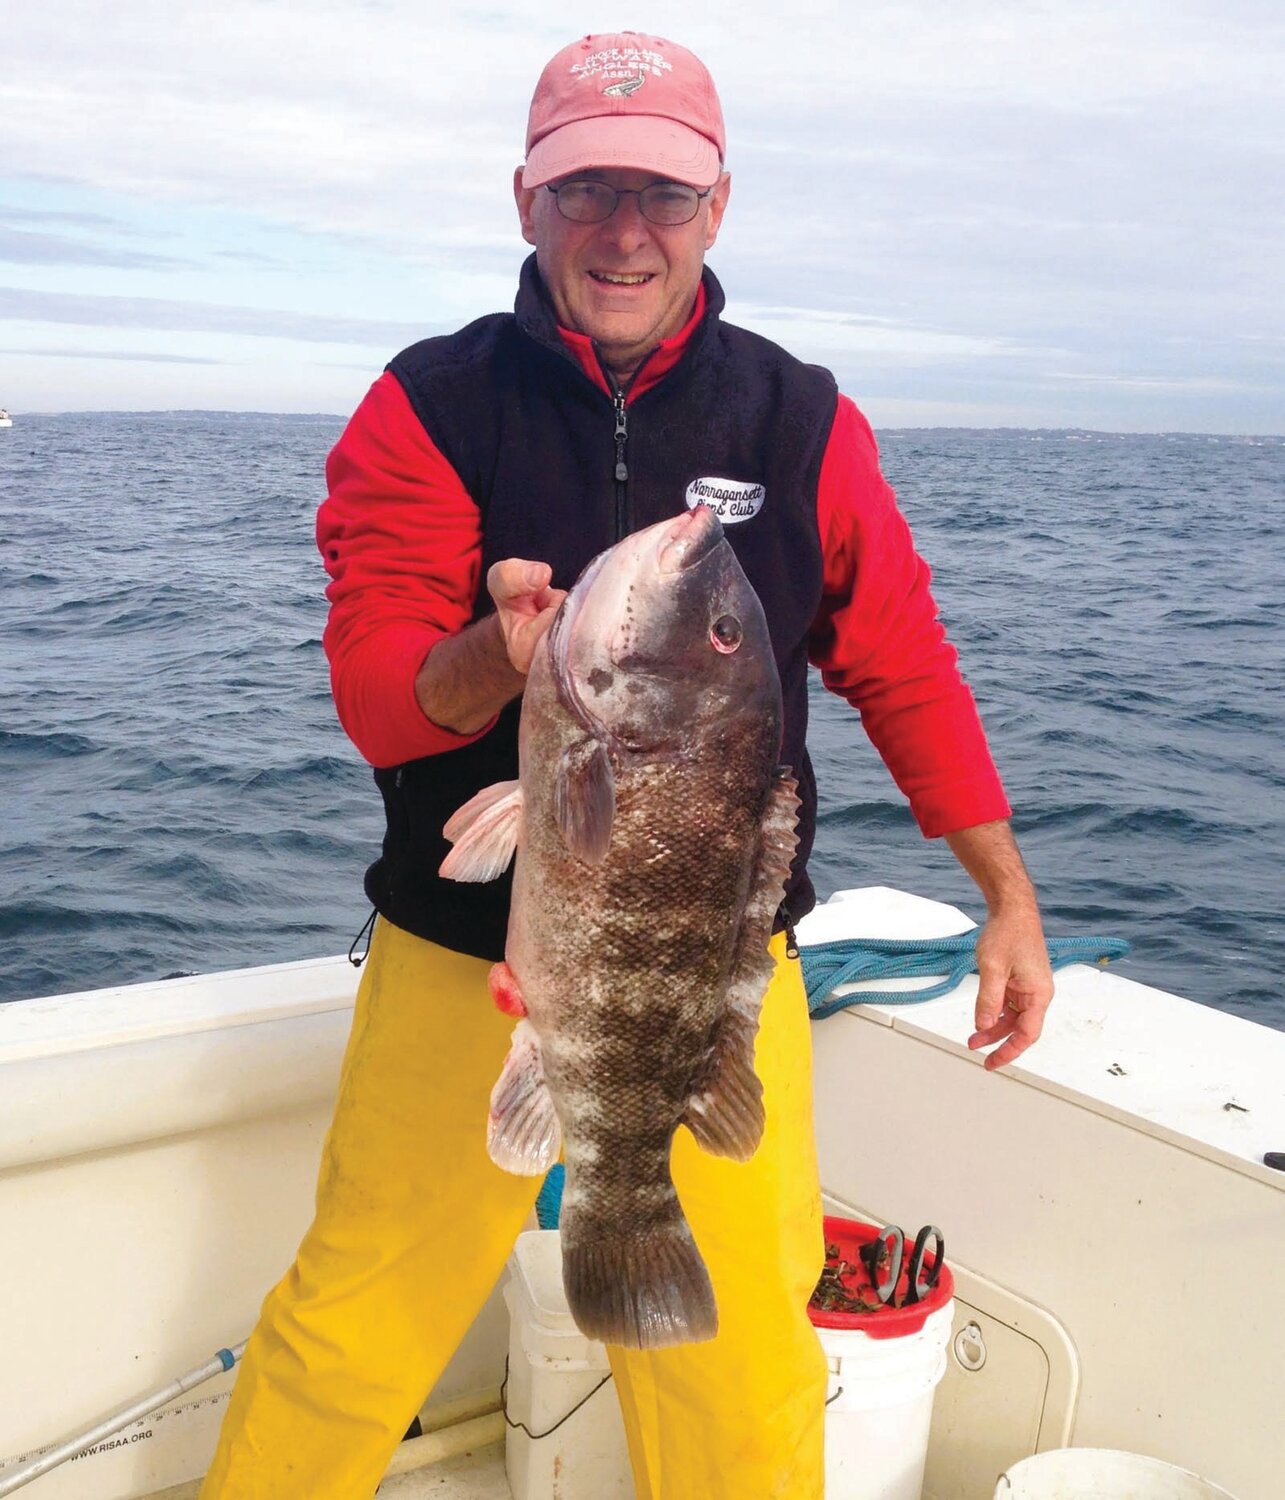 TAUTOG TIPS: Richie Riech will offer tautog tips at a September 25 RI Saltwater Anglers Association seminar at the Elks Club in West Warwick.